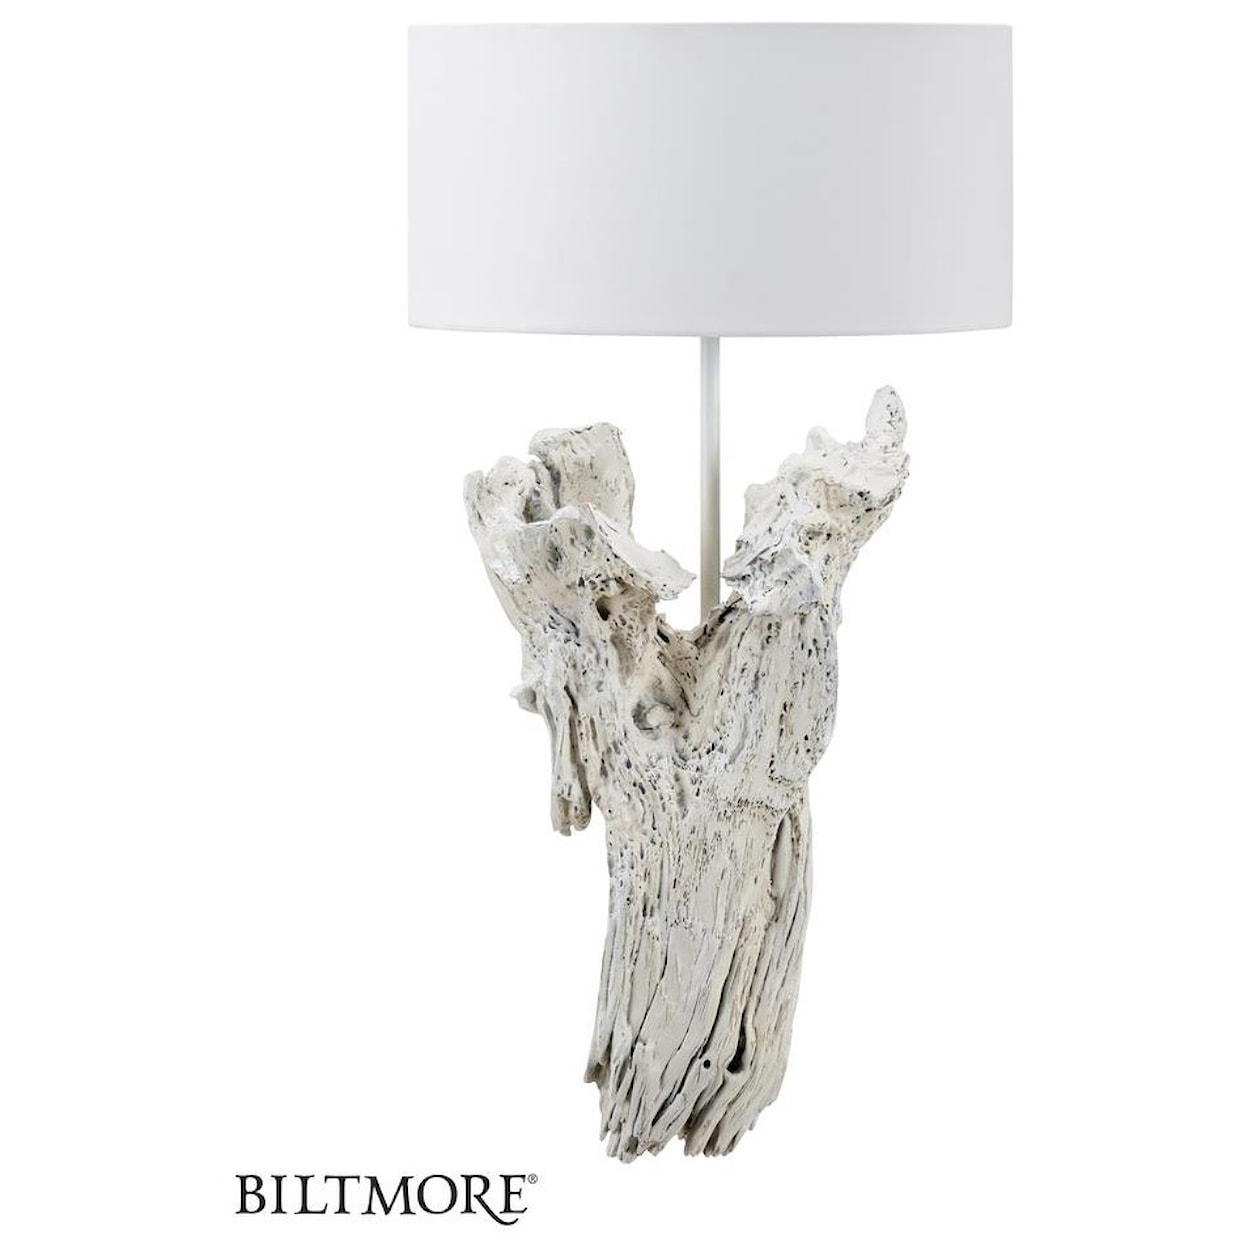 Wildwood Lamps Olmsted Olmsted Sconce